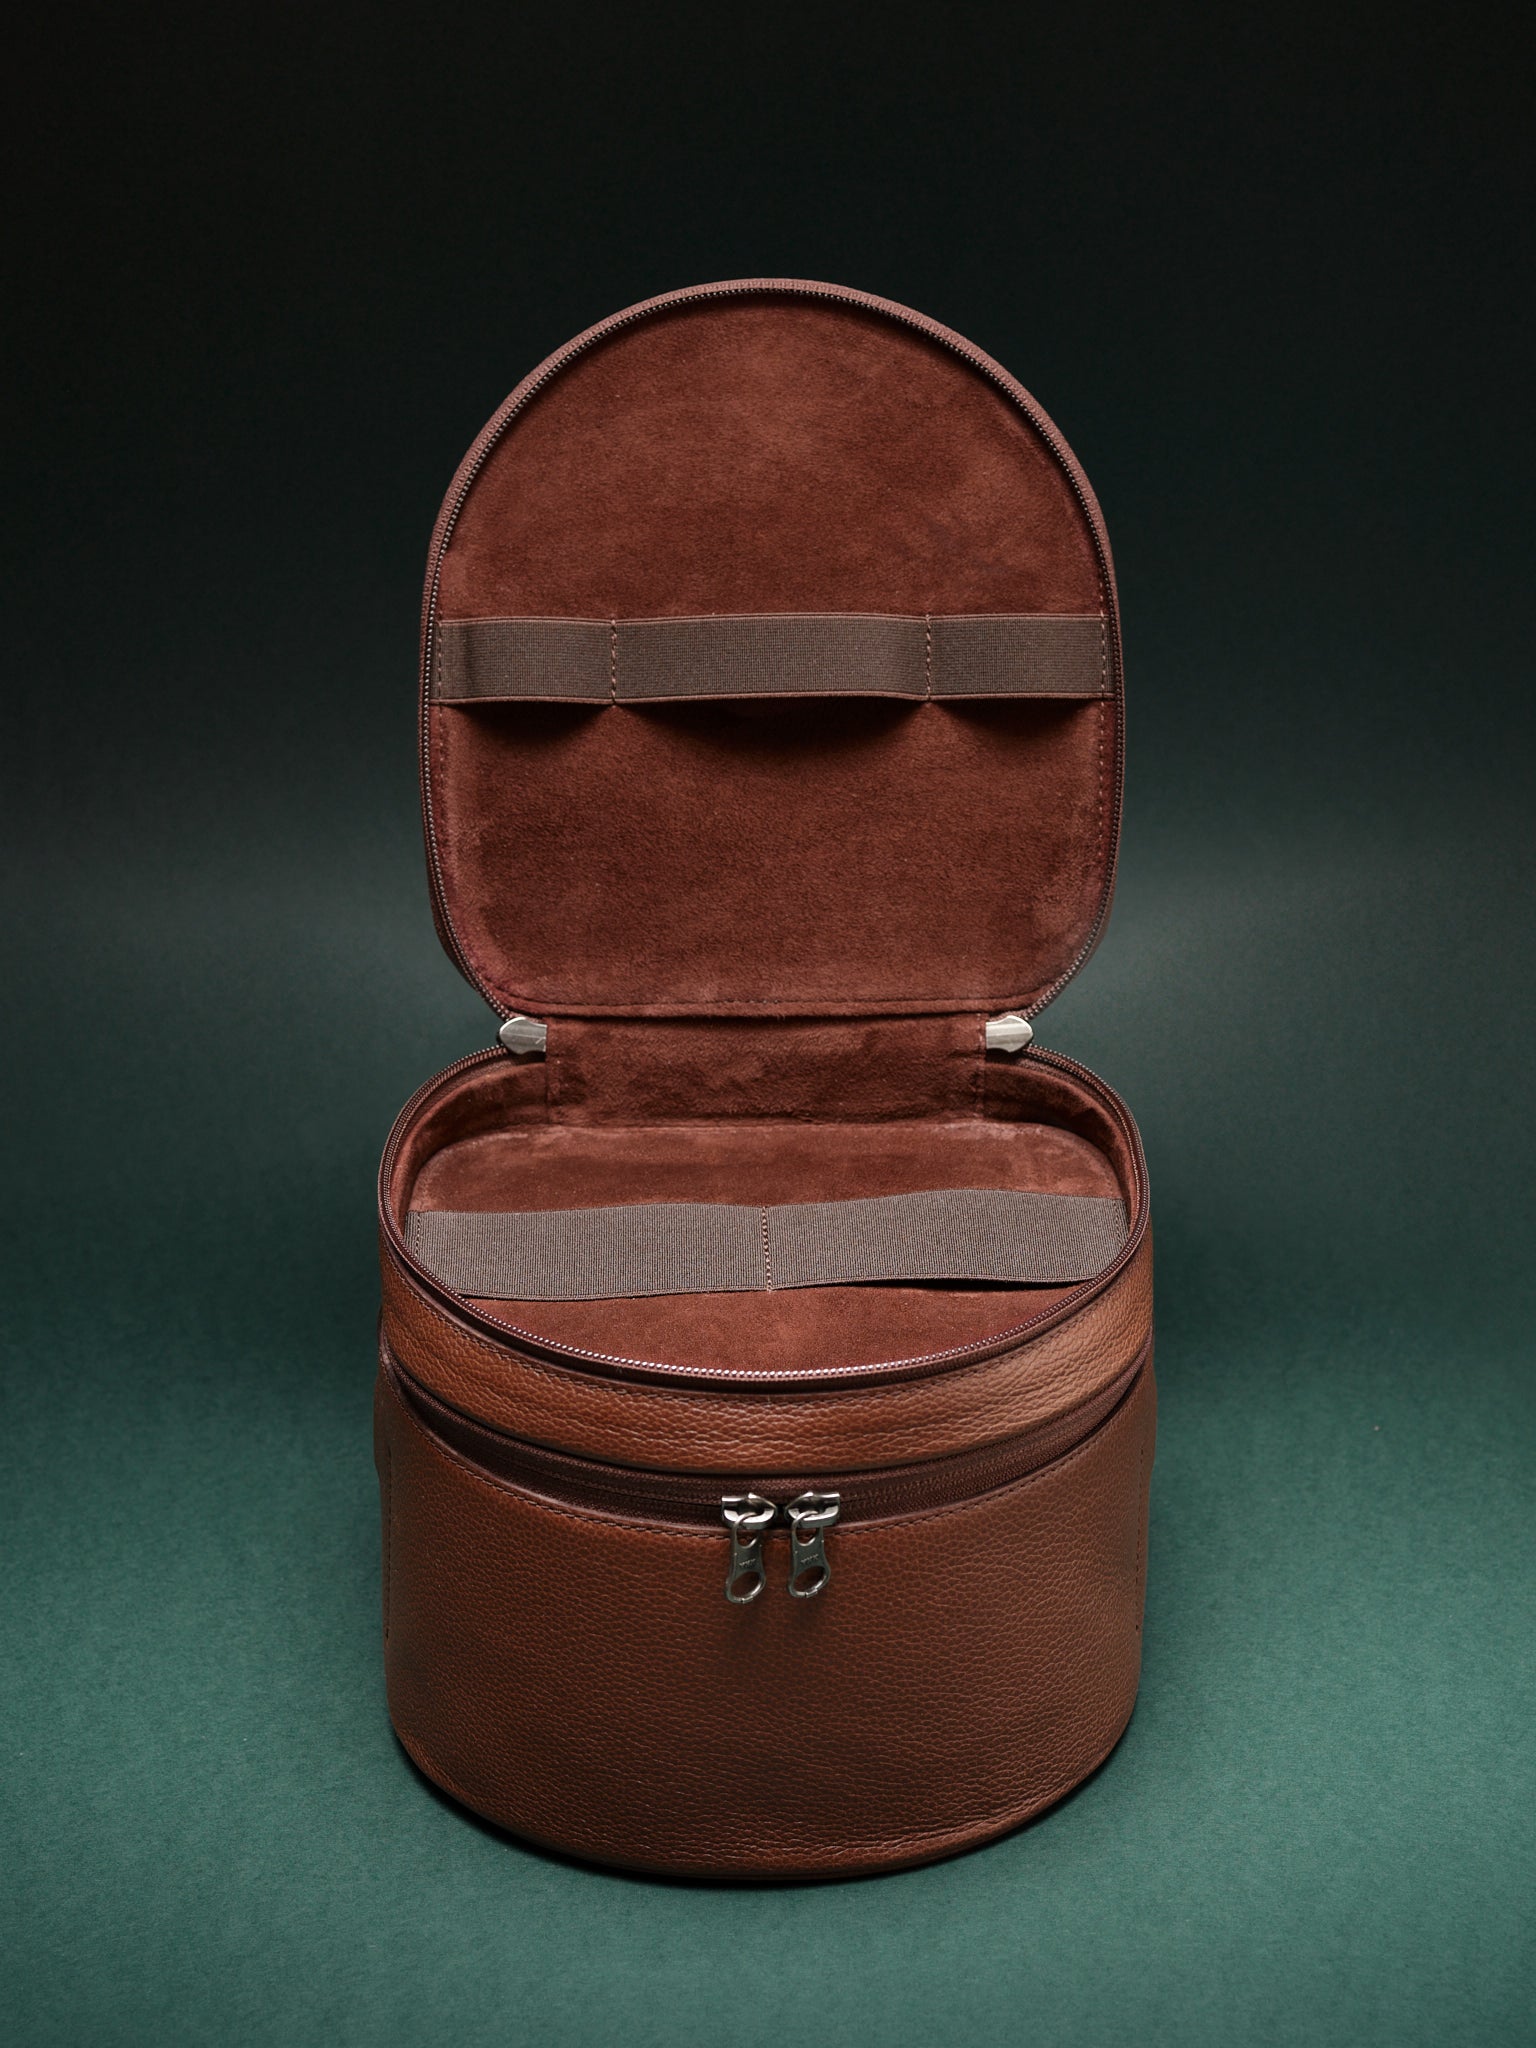 Elastic Organization Slots. Apple Vision Pro. Headset Case Brown by Capra Leather